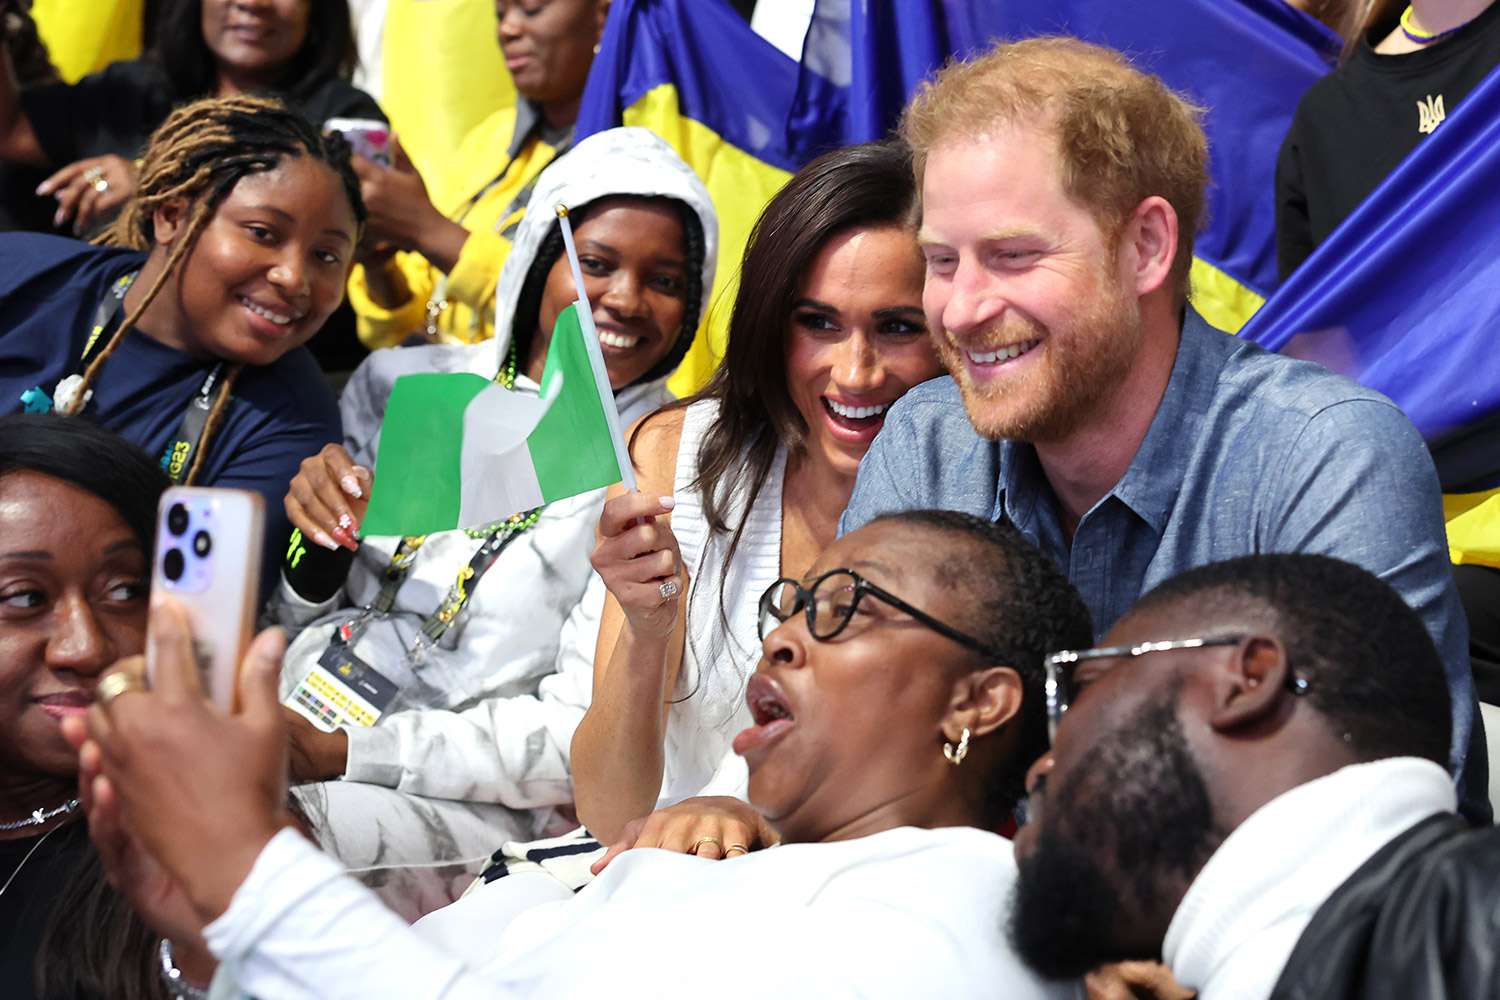 Why We Shunned Prince Harry, Wife’s Visit To Nigeria – British High Commission